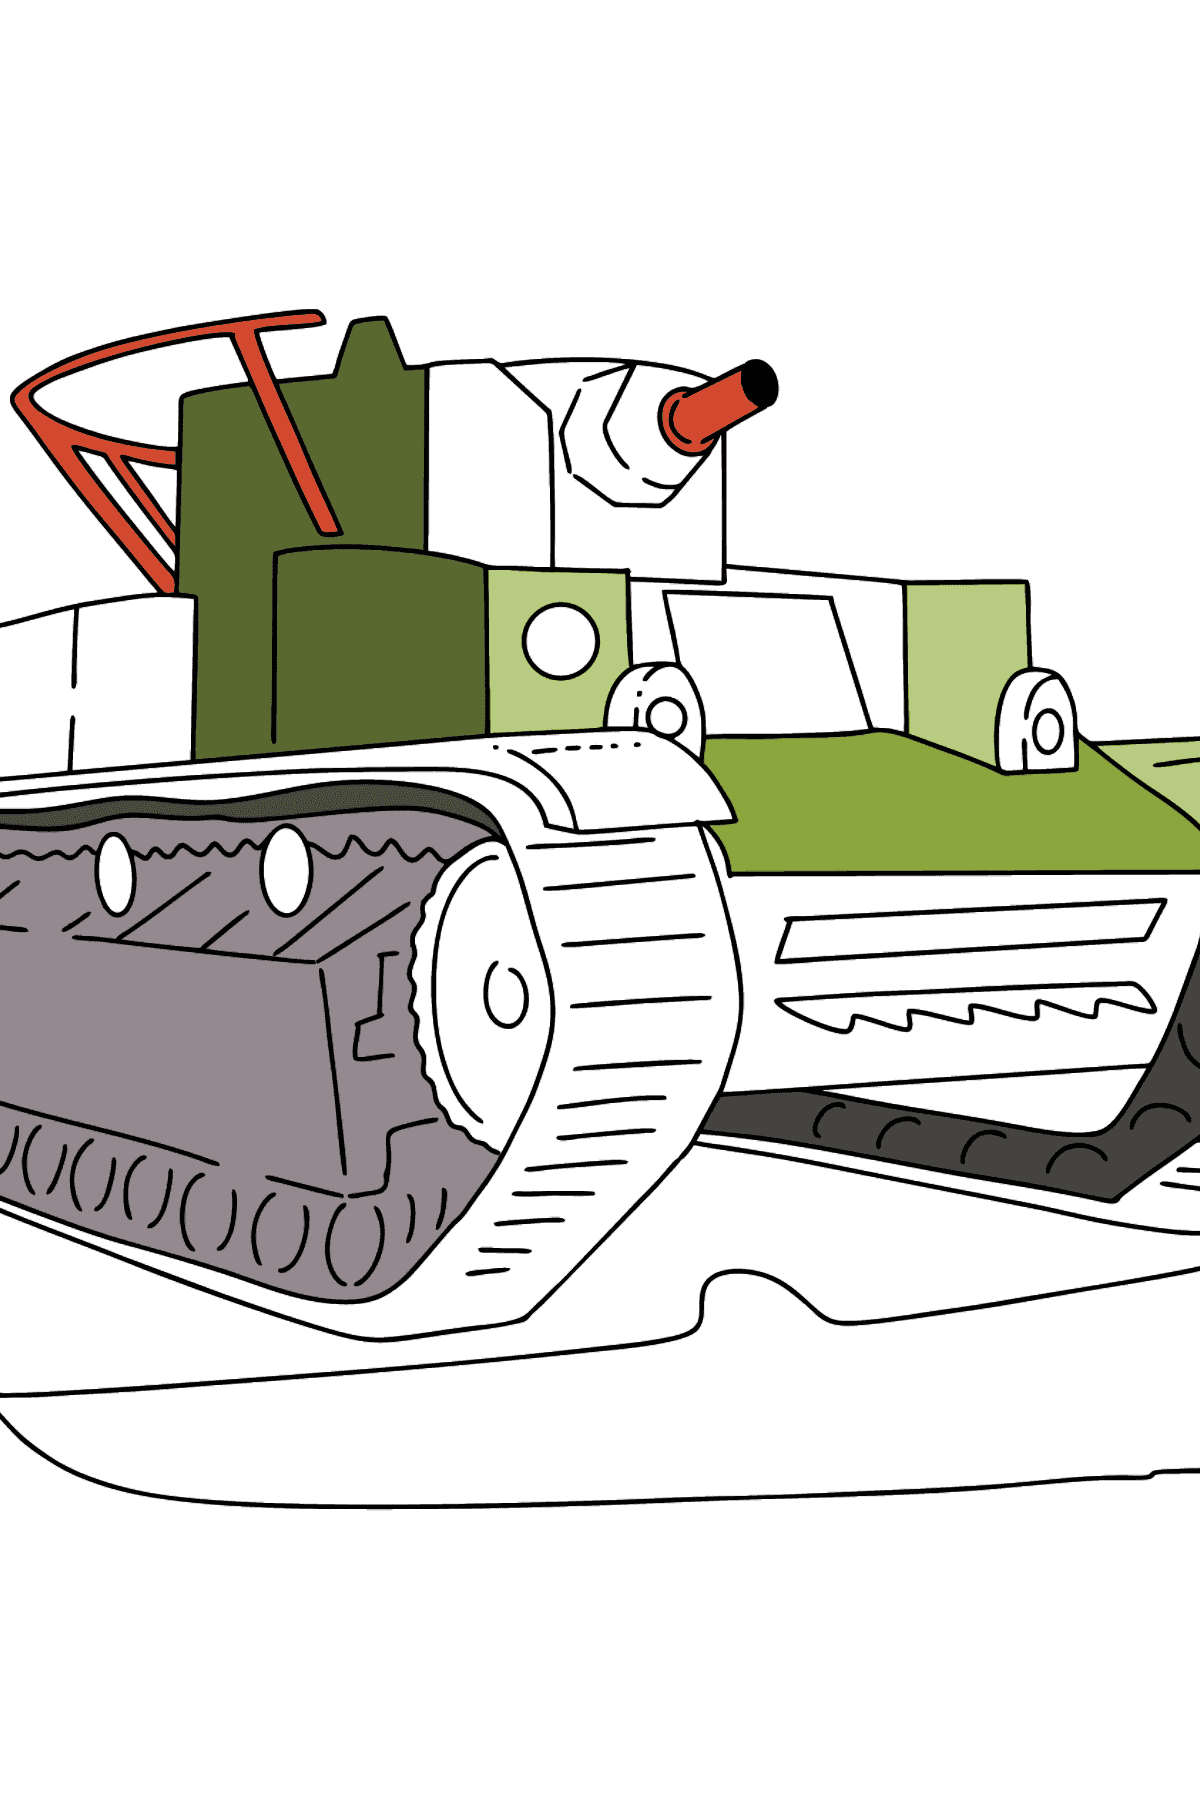 Tank T 28 coloring page - Coloring Pages for Kids